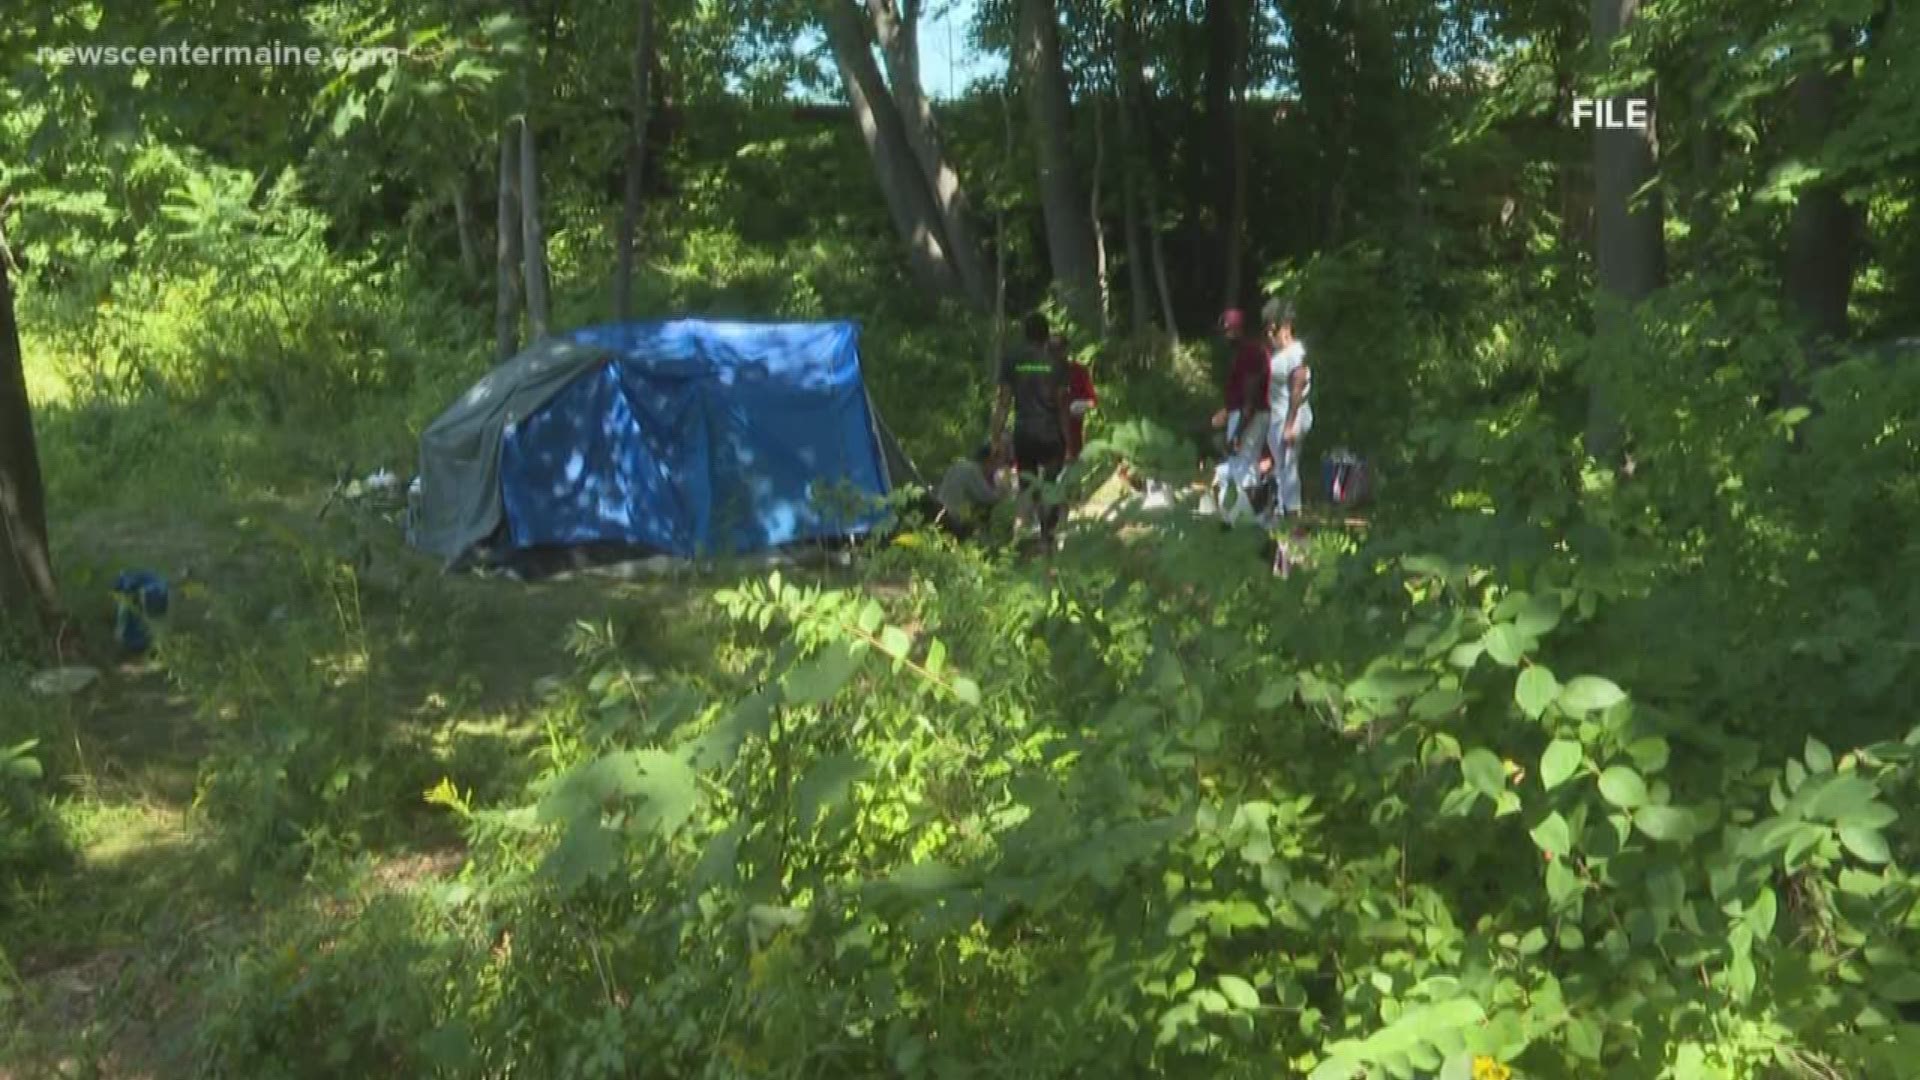 Police warn Sanford residents not to donate to homeless camps.